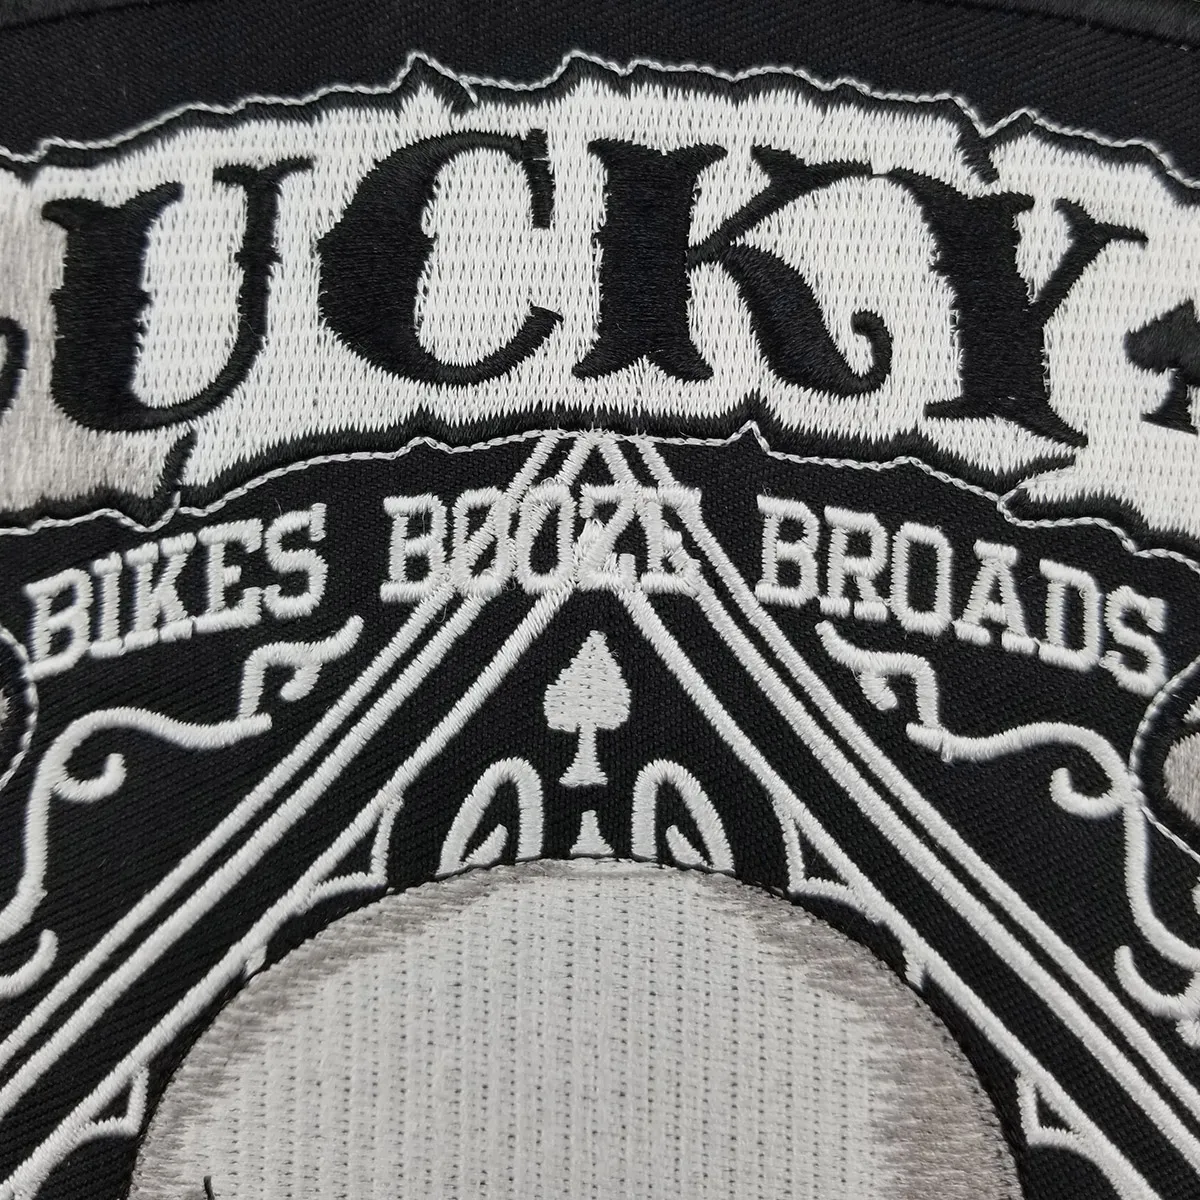 Wholesale Custom 10.5 inches Huge Embroidery Biker Patches for Jacket Back MC Surport PUNK LUCKY 7